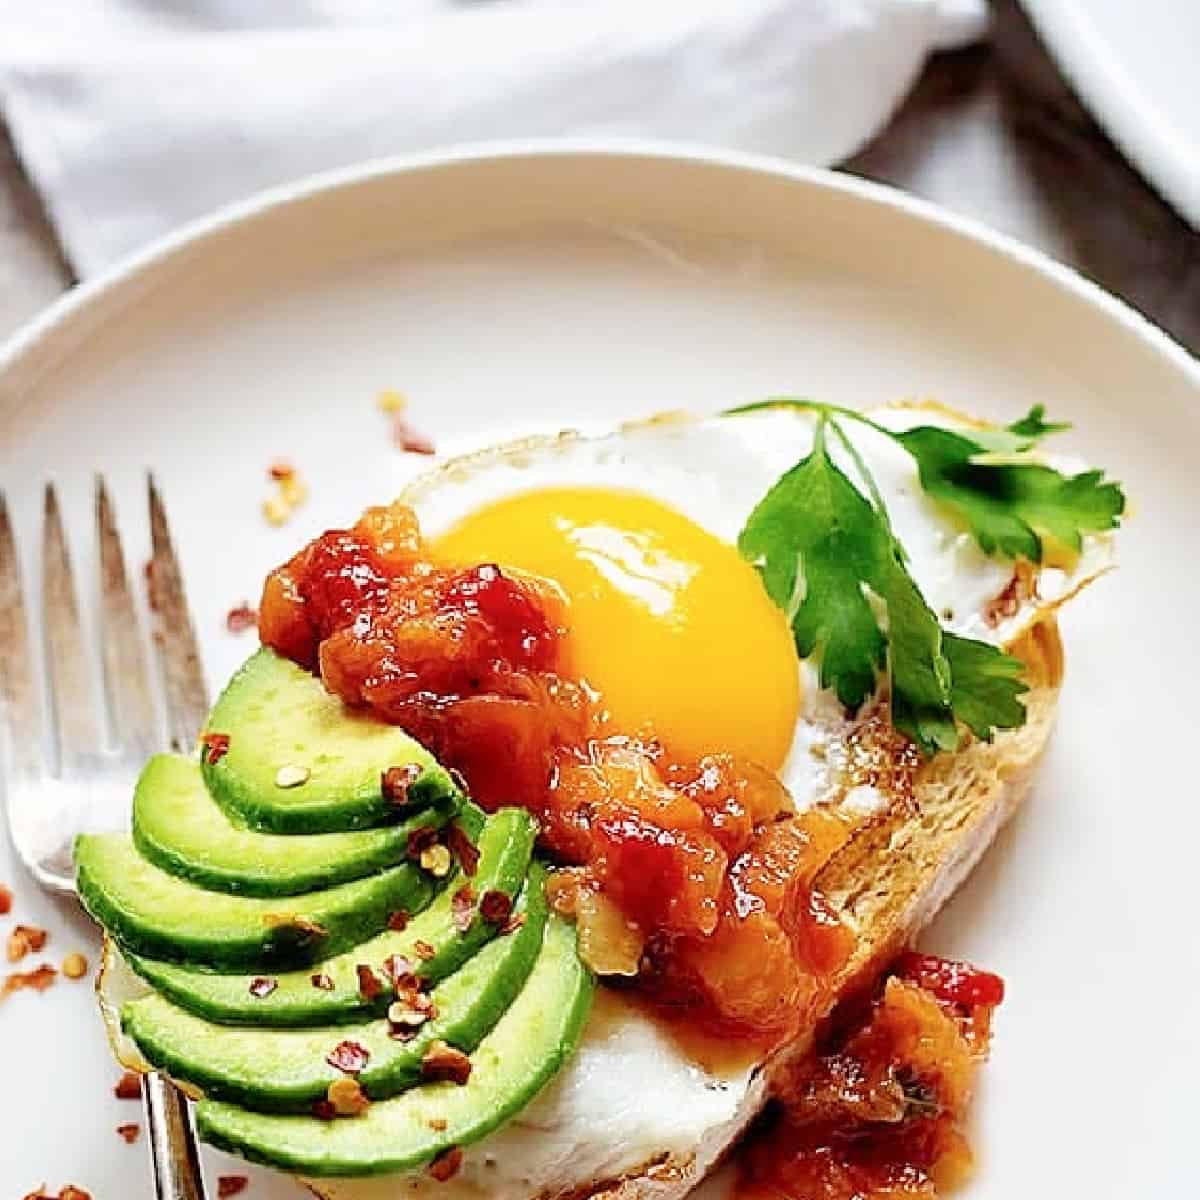 Say good bye to boring breakfast. This Sweet and Spicy Breakfast toast is here to help you start a delicious day. Start the day with a kick of salsa for more flavor! Say good bye to boring breakfast. This Sweet and Spicy Breakfast toast is here to help you start a delicious day. Start the day with a kick of salsa for more flavor!
